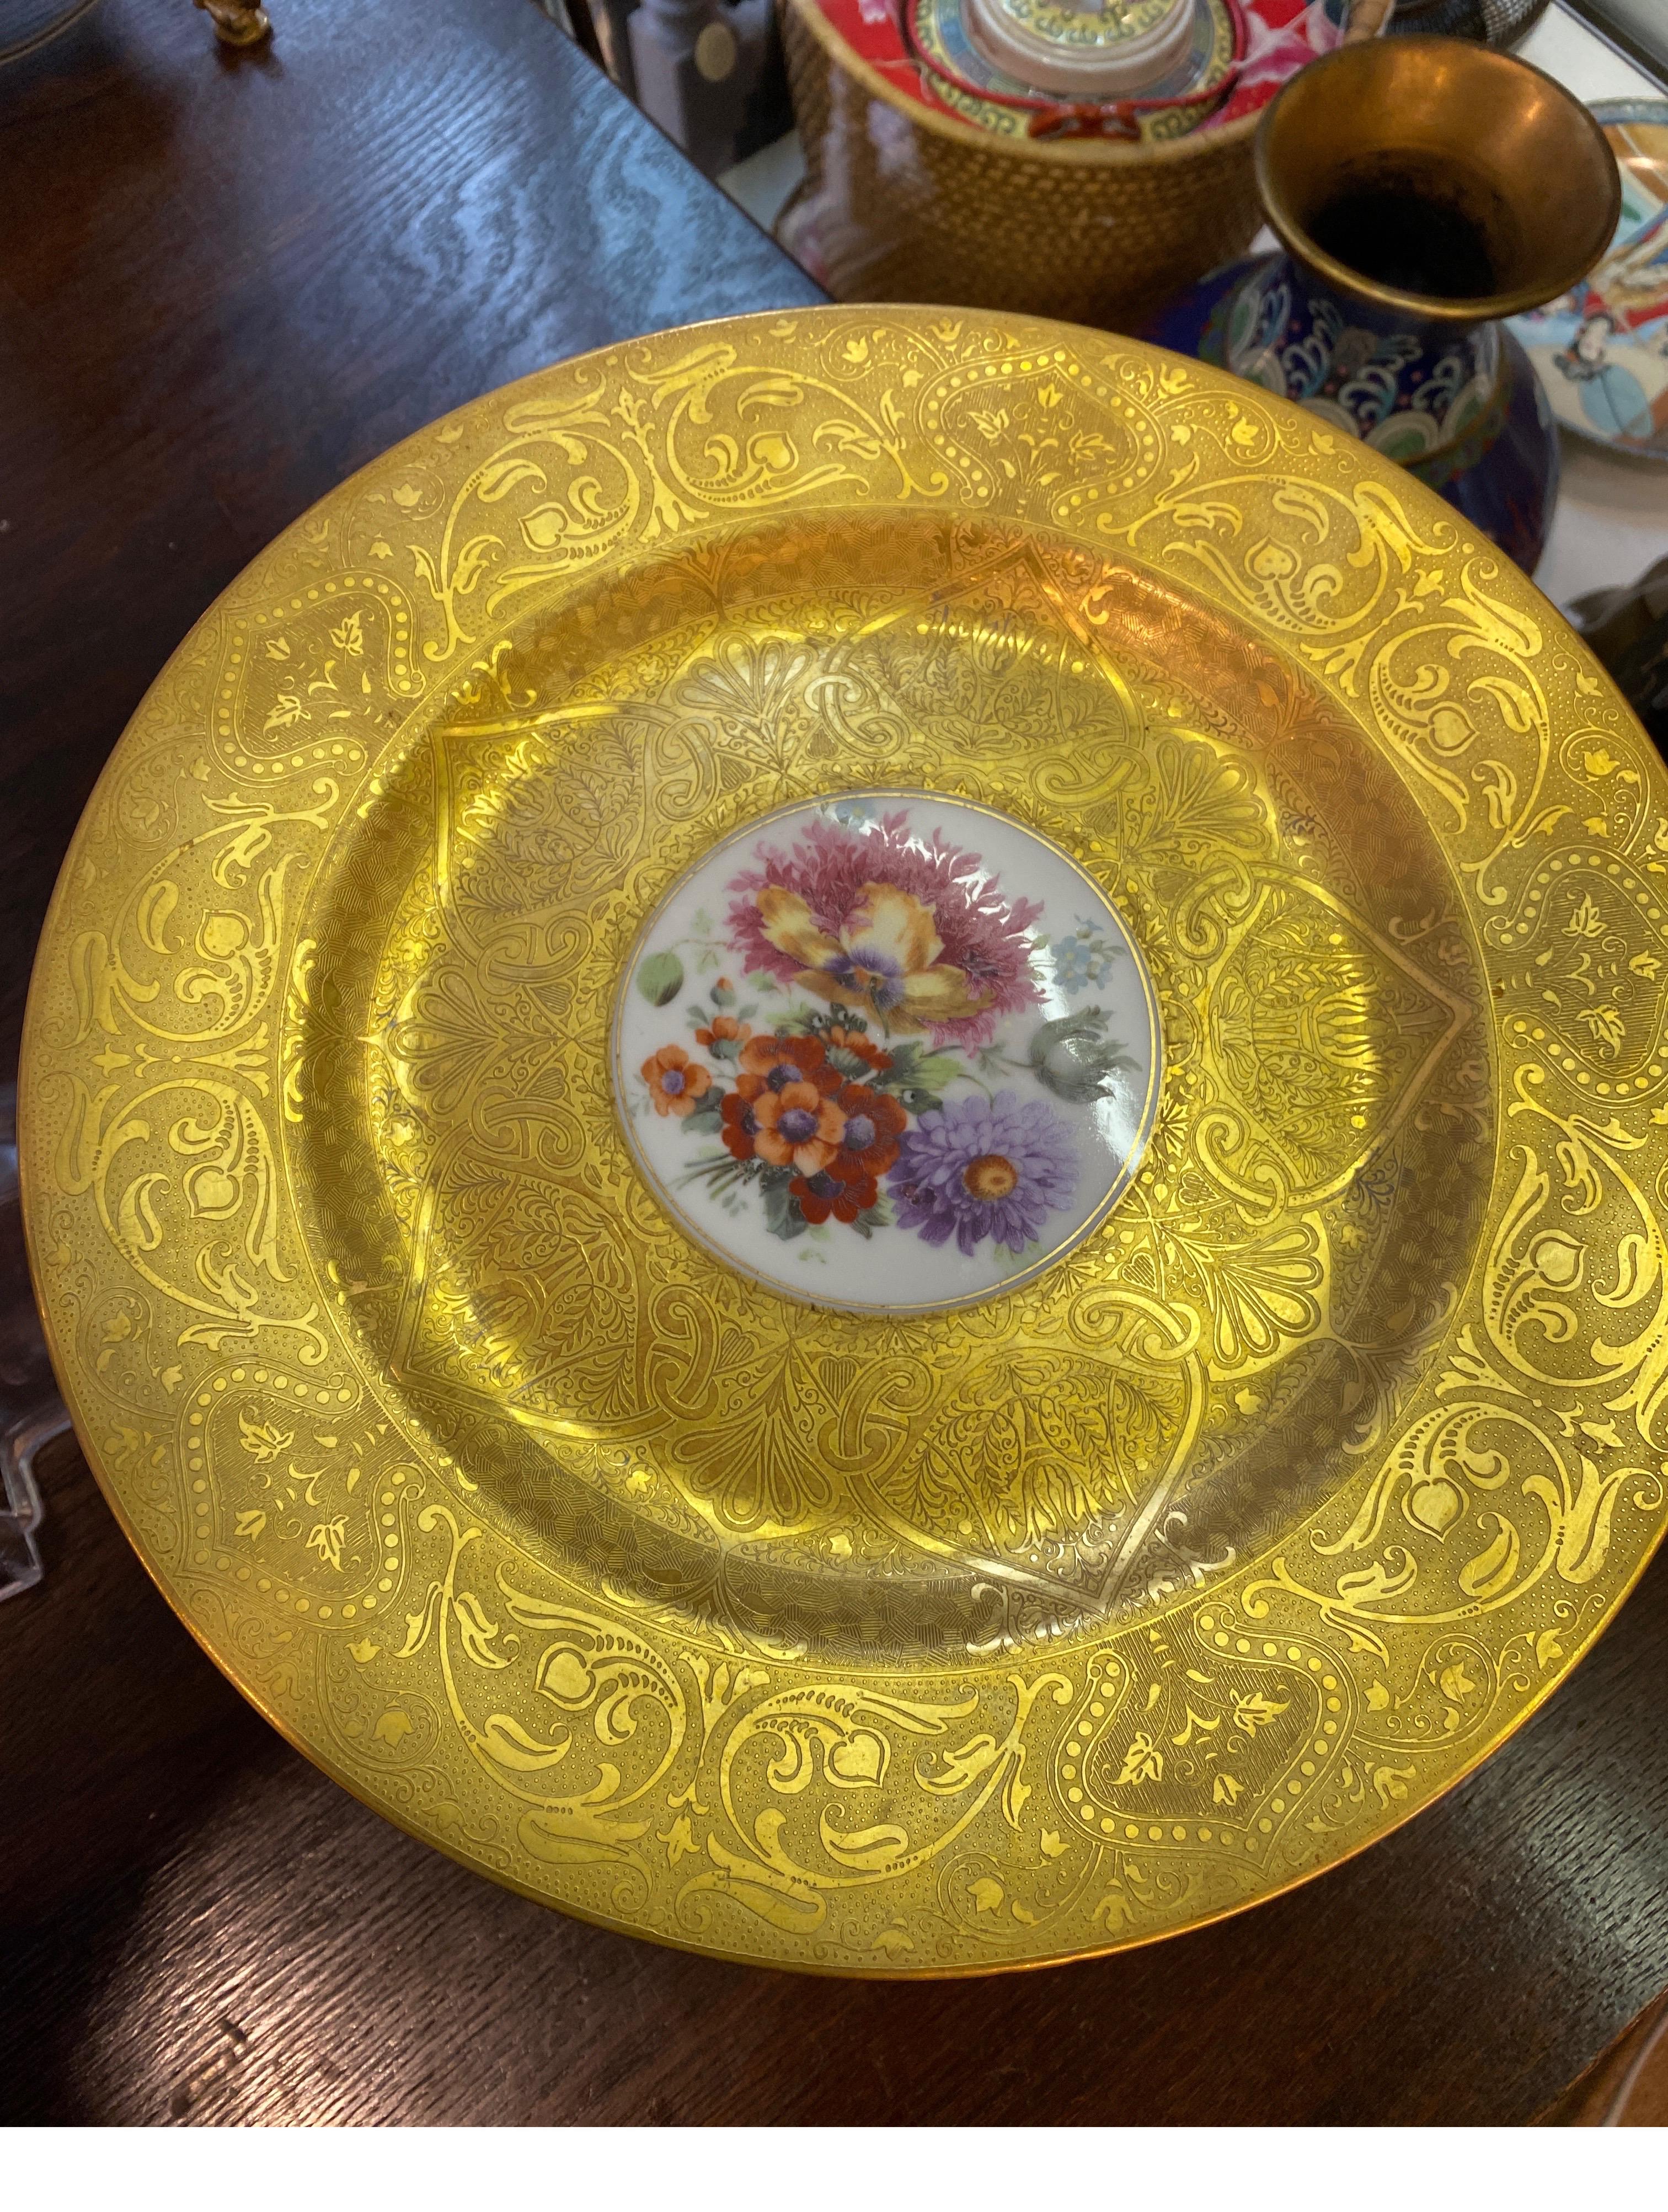 A set of 12 heavy gold encrusted service plates by Hutchenreuther, Germany, Circa 1920's, measuring 10.5 diameter plates with intaglio pattern broad gold borders with central Dresden flower bouquets.  All with blue underglaze mark